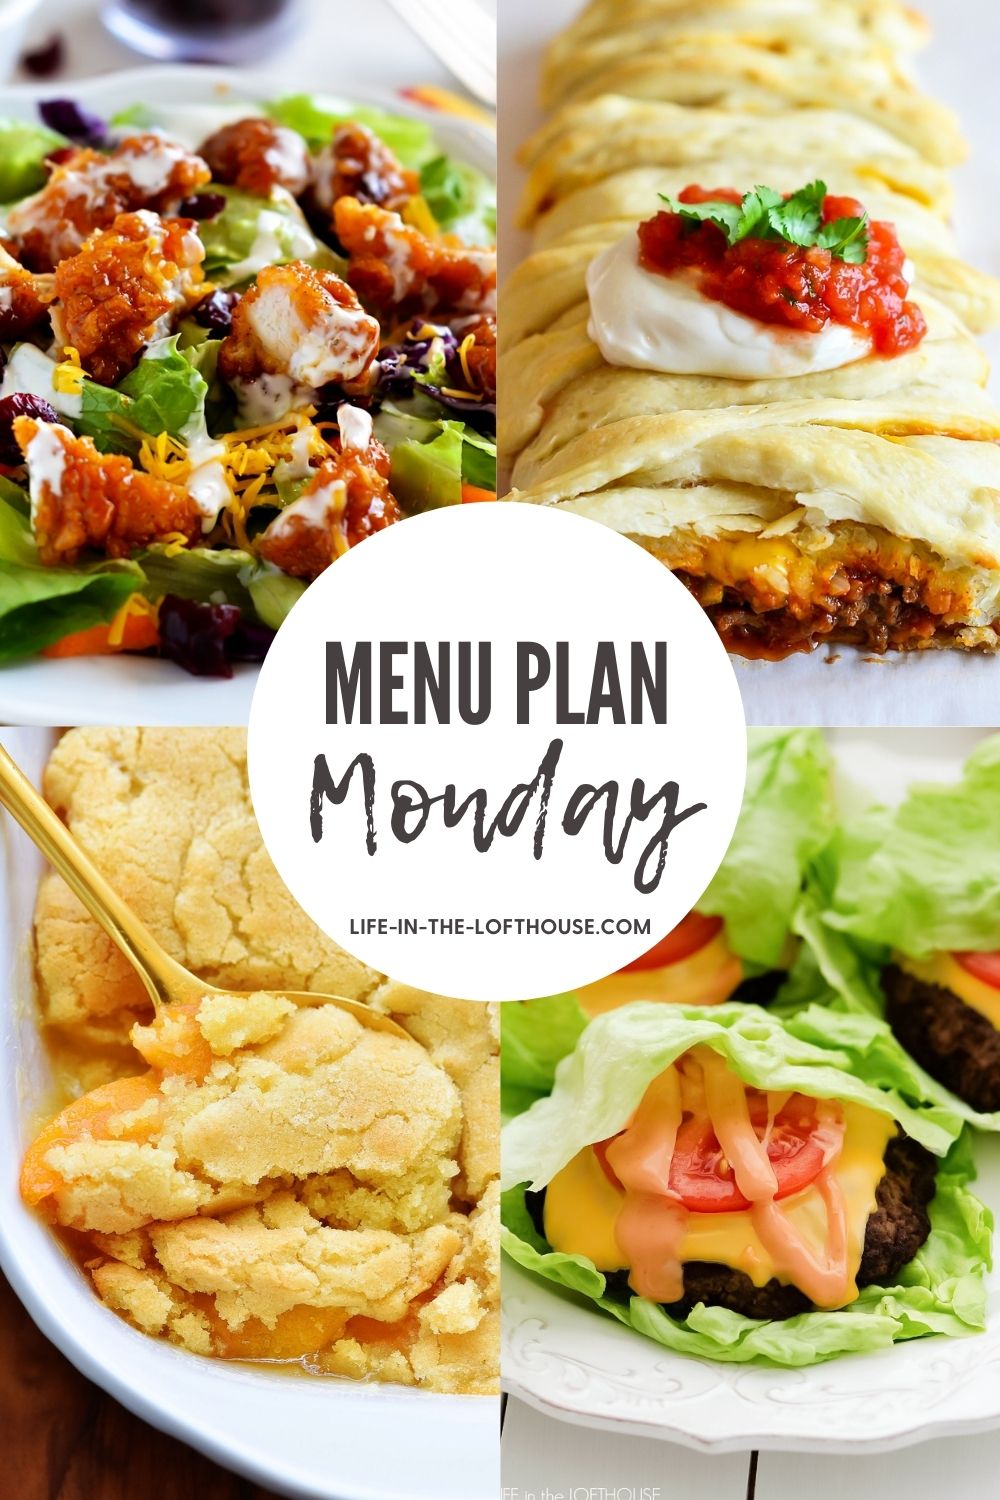 Menu Plan Monday is an easy guide to help you decide what to make for dinner. Each menu has six delicious dinner ideas and one dessert!